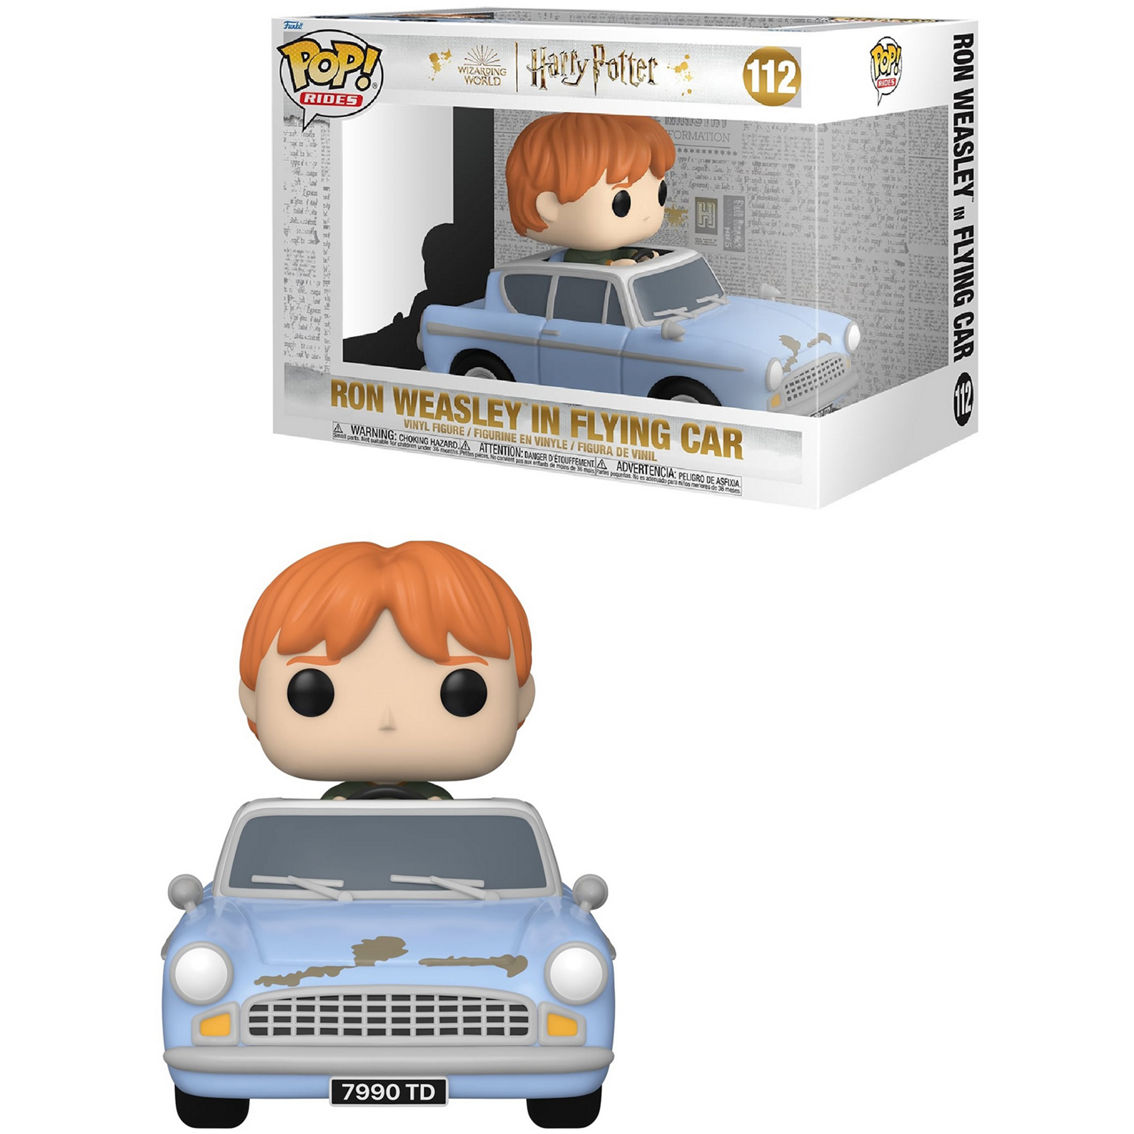 Funko POP! Harry Potter and The Chamber of Secrets 20th Anniversary Collectors Set - Image 3 of 5